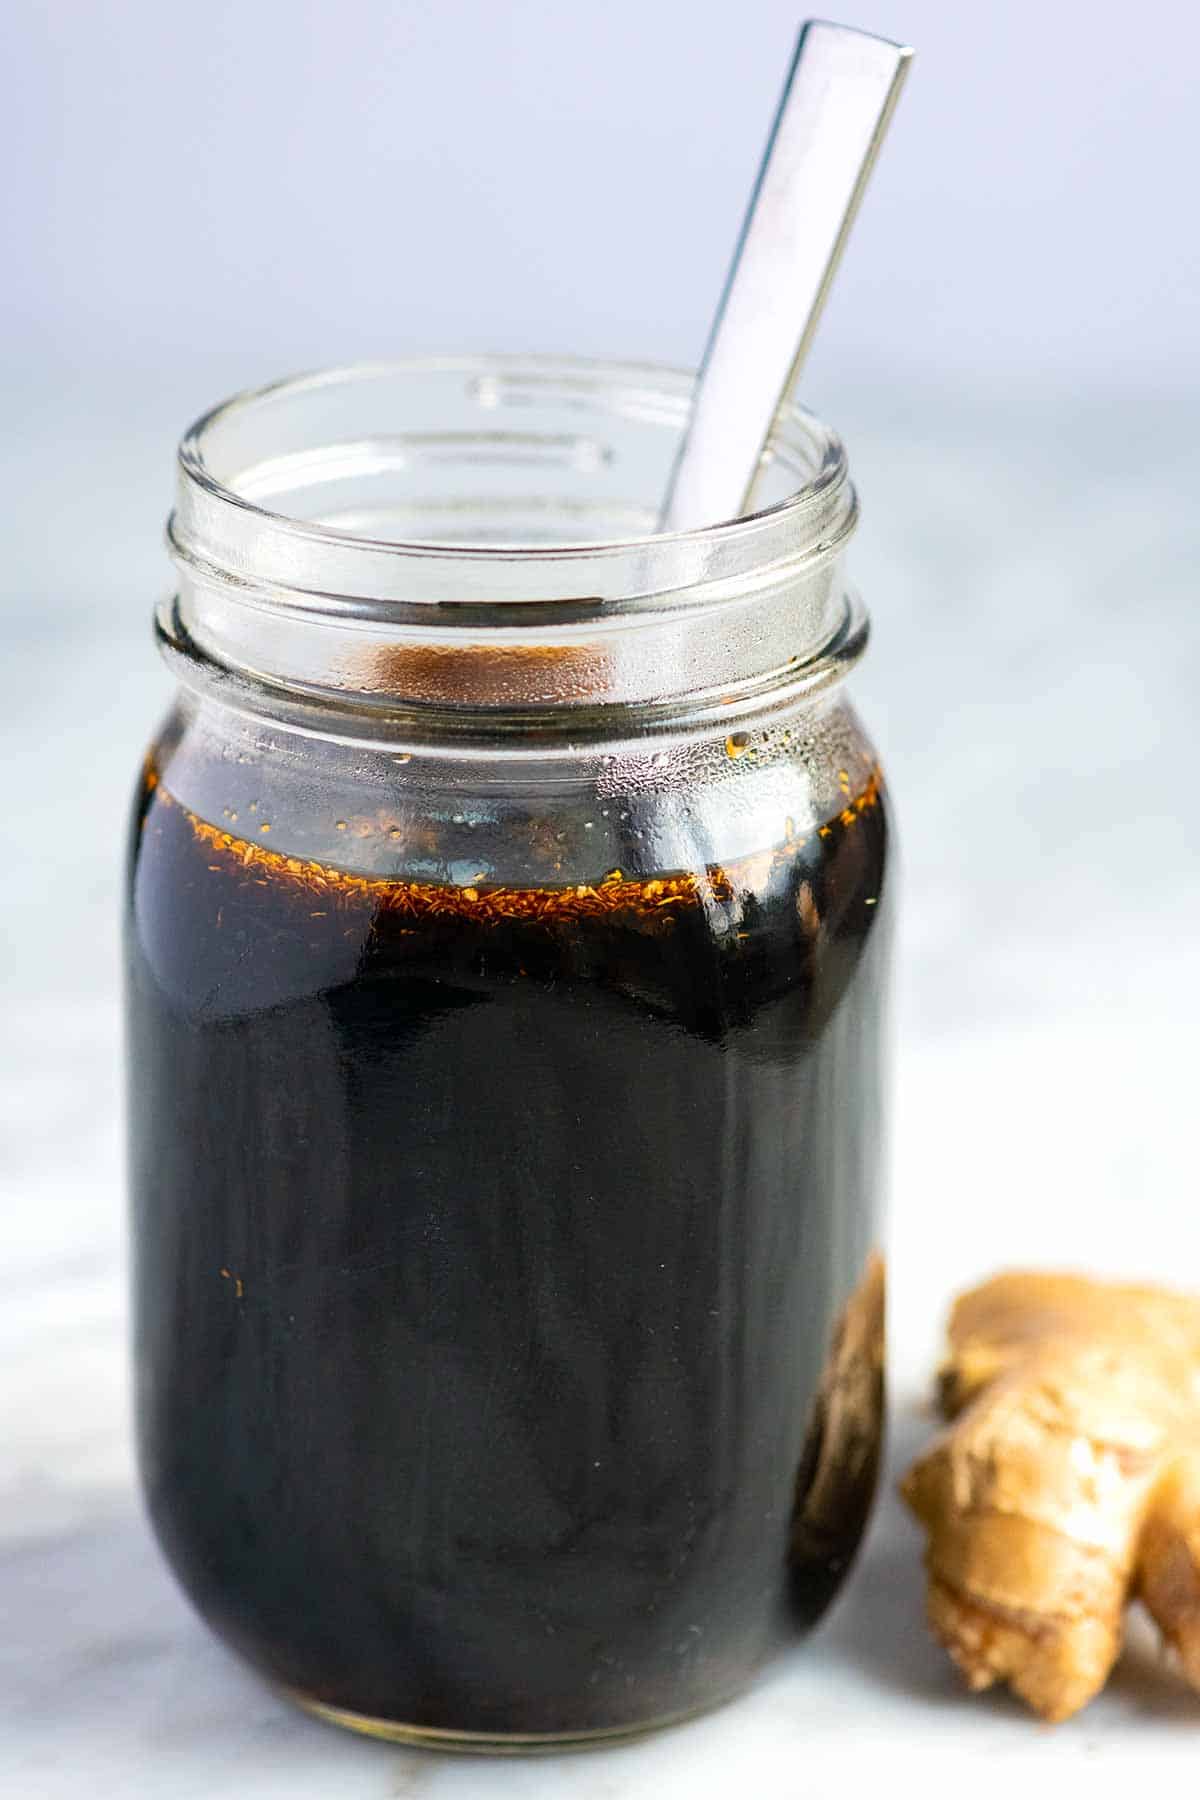 How to Make Teriyaki Sauce From Scratch